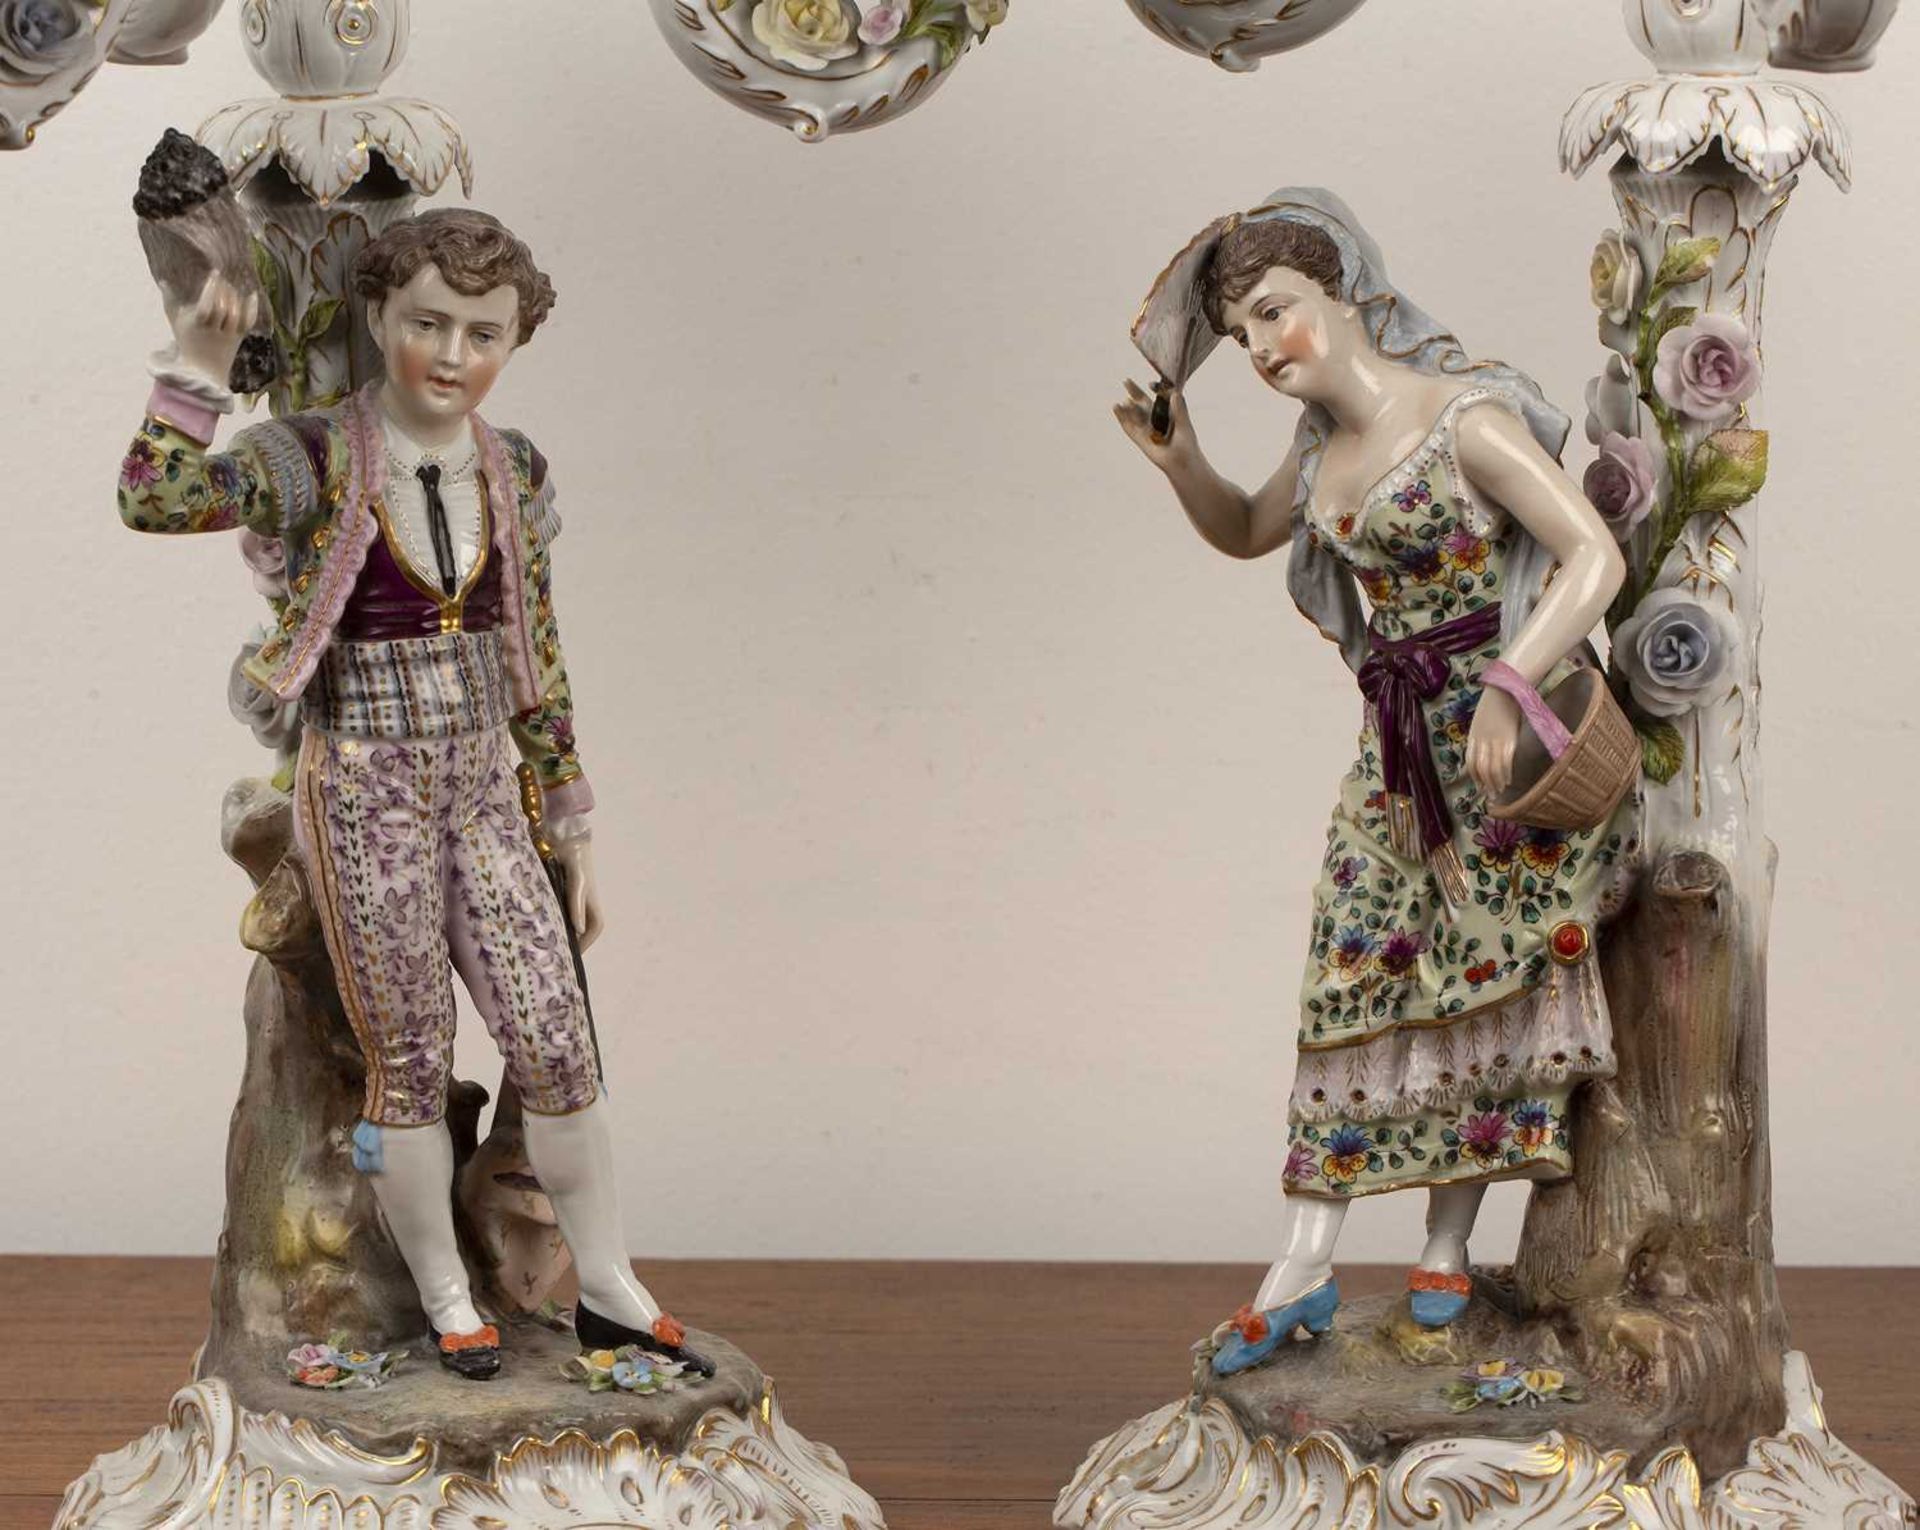 Pair of Triebner, ENS & Eckert (Volkstedt) porcelain candlesticks with figural decoration, flowers - Image 3 of 4